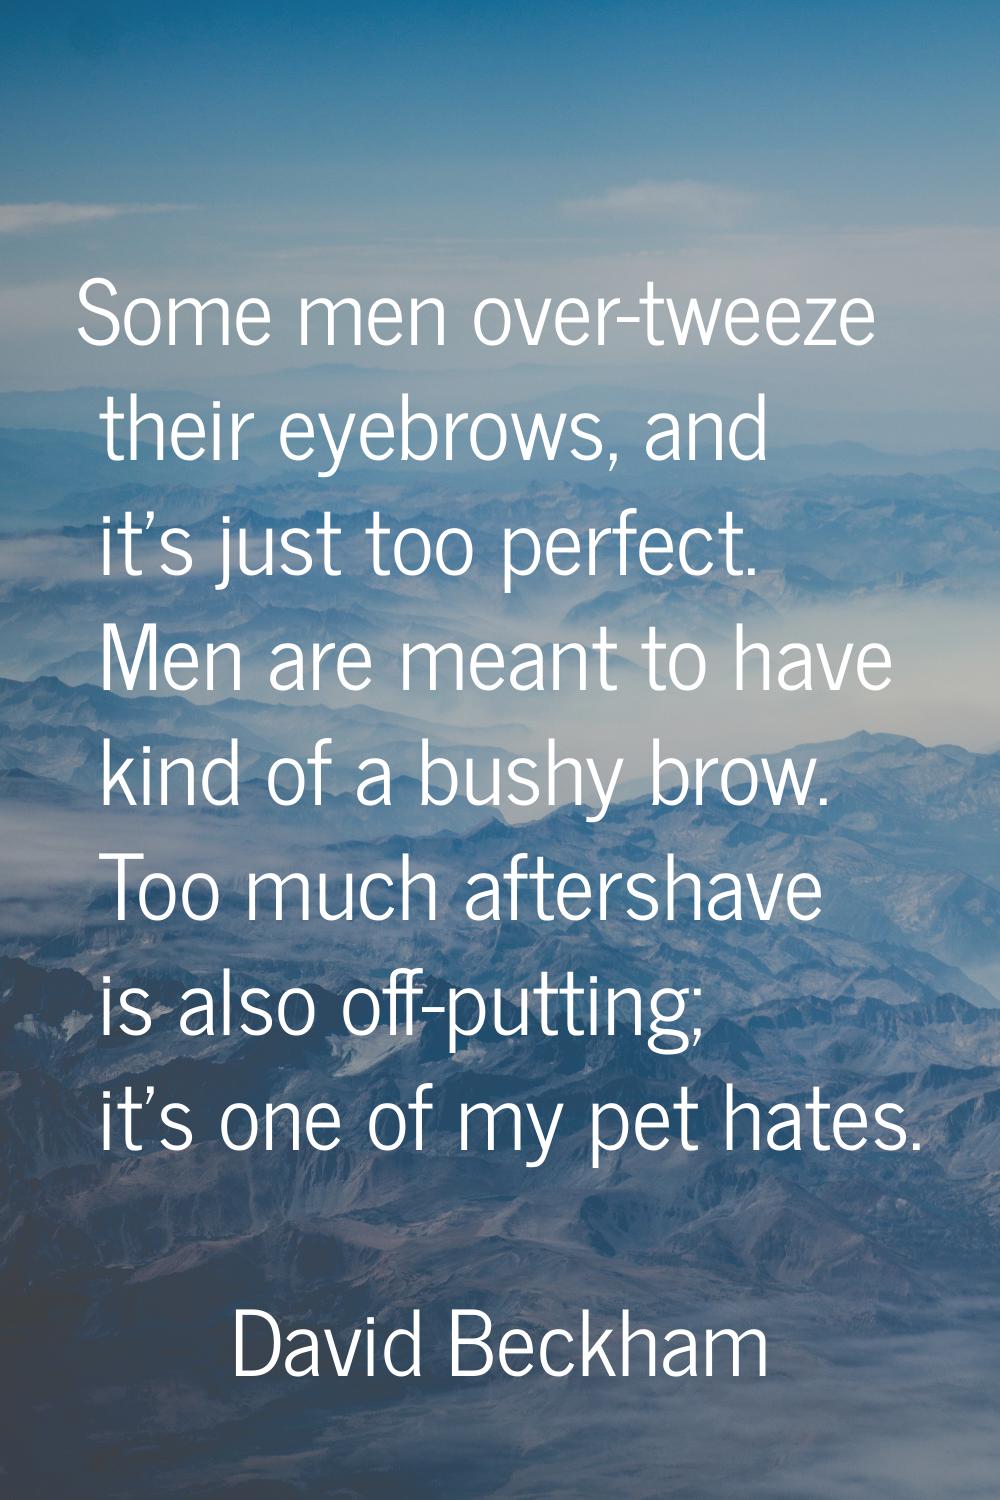 Some men over-tweeze their eyebrows, and it's just too perfect. Men are meant to have kind of a bus